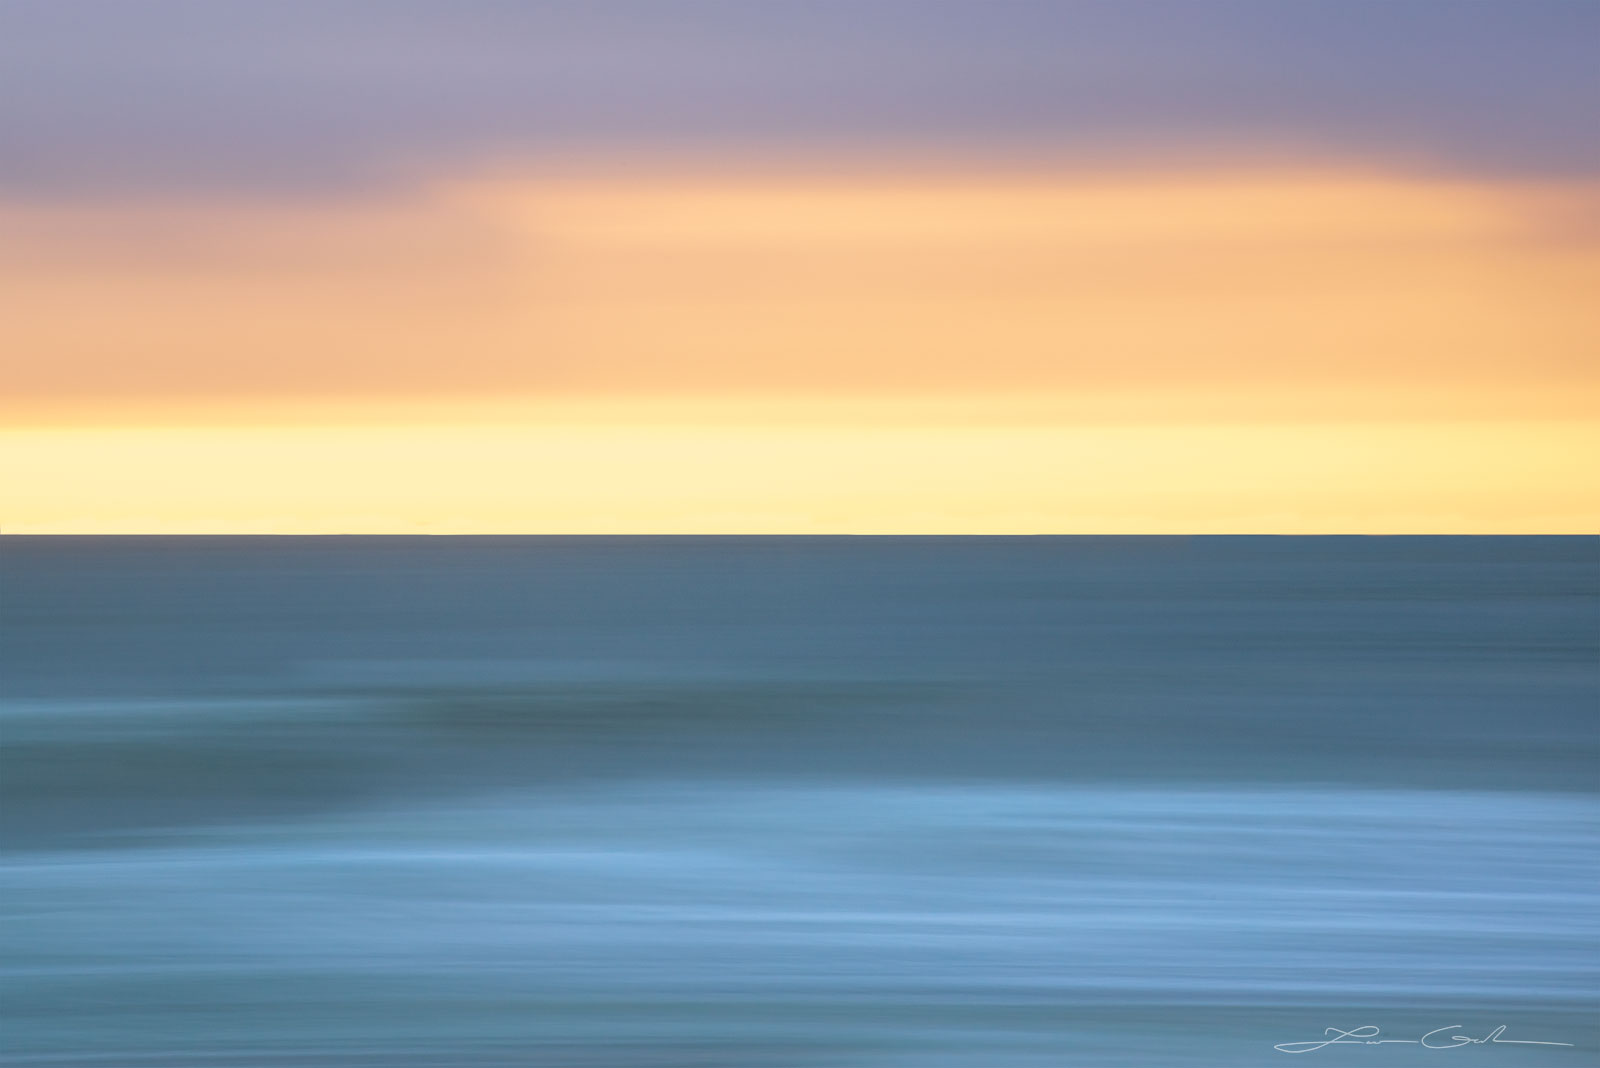 an abstract morning seascape with deep blue water and orange sky - Gintchin Fine Art